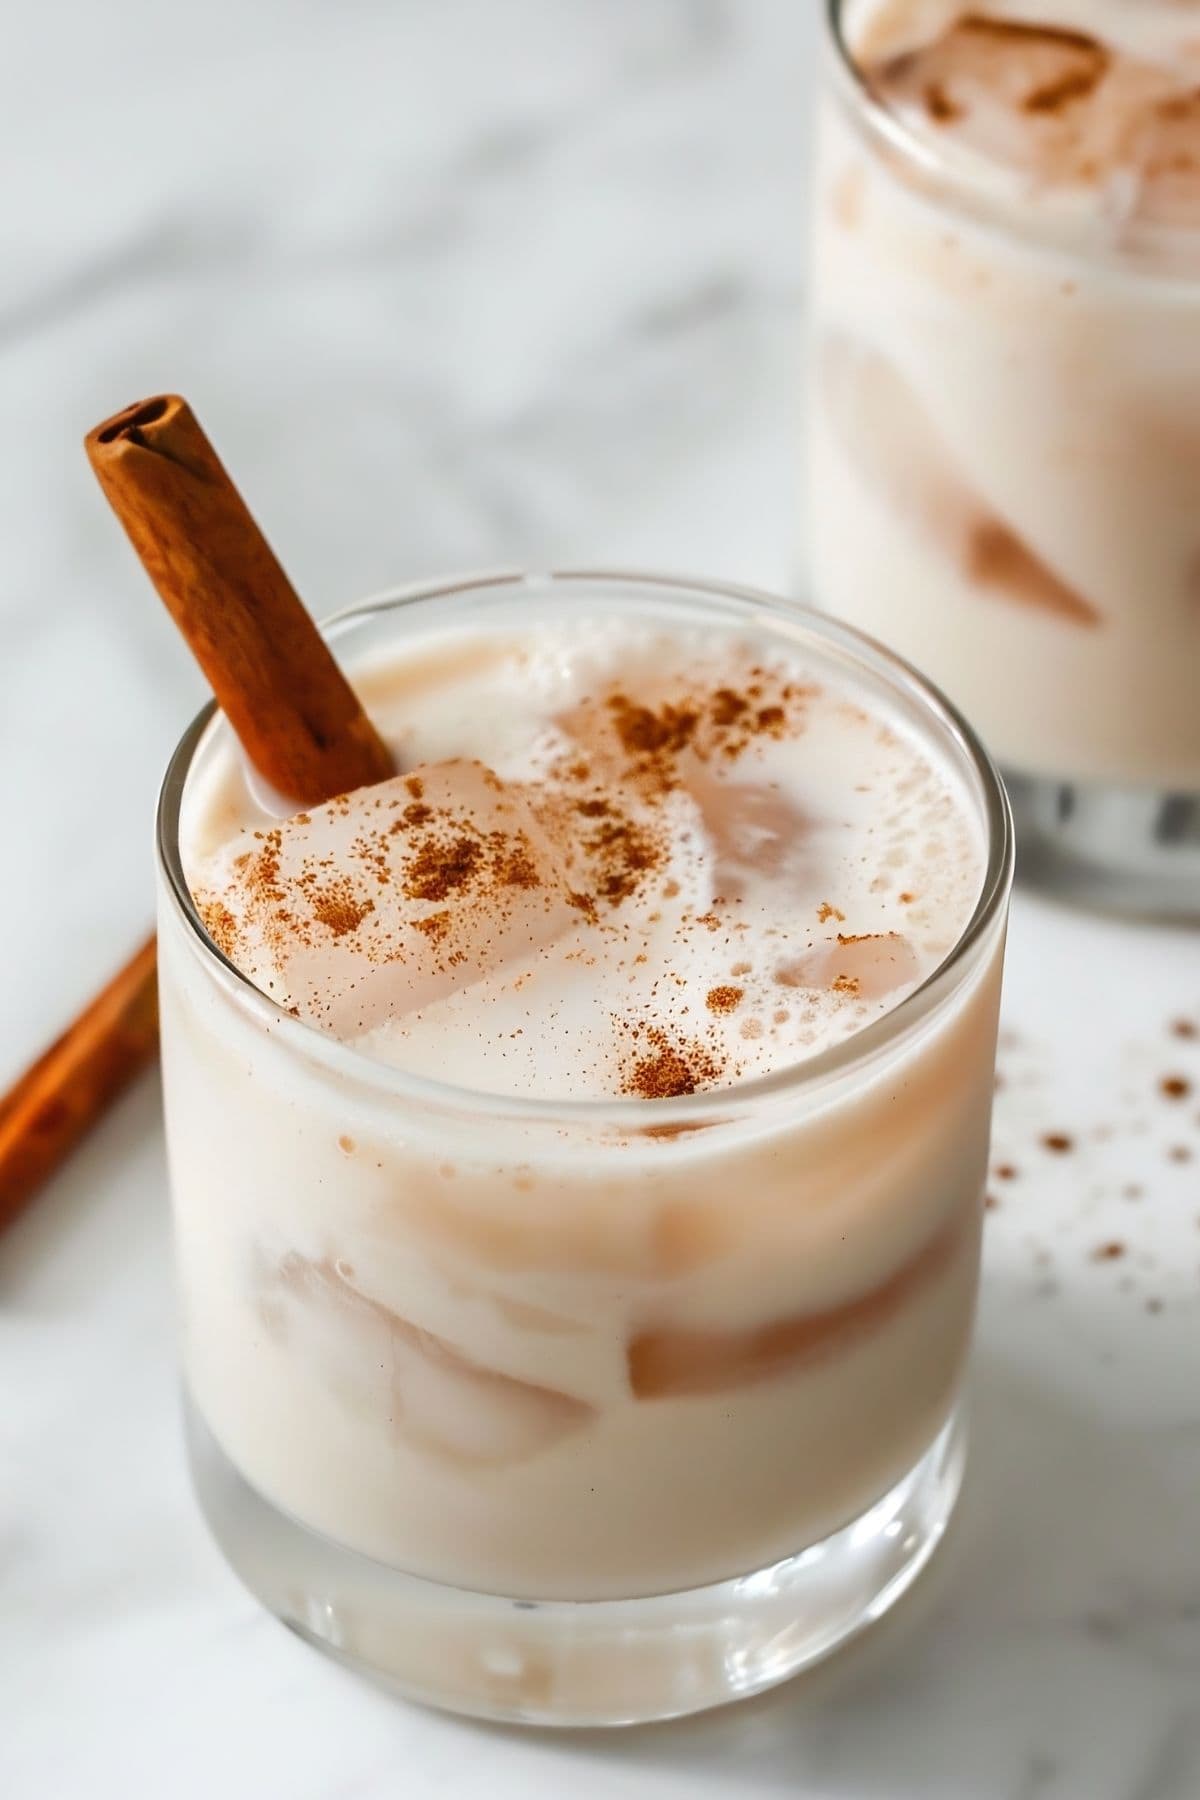 Creamy Mexican Horchata with Ice in a Glass with Cinnamon Dusting and a Cinnamon Stick